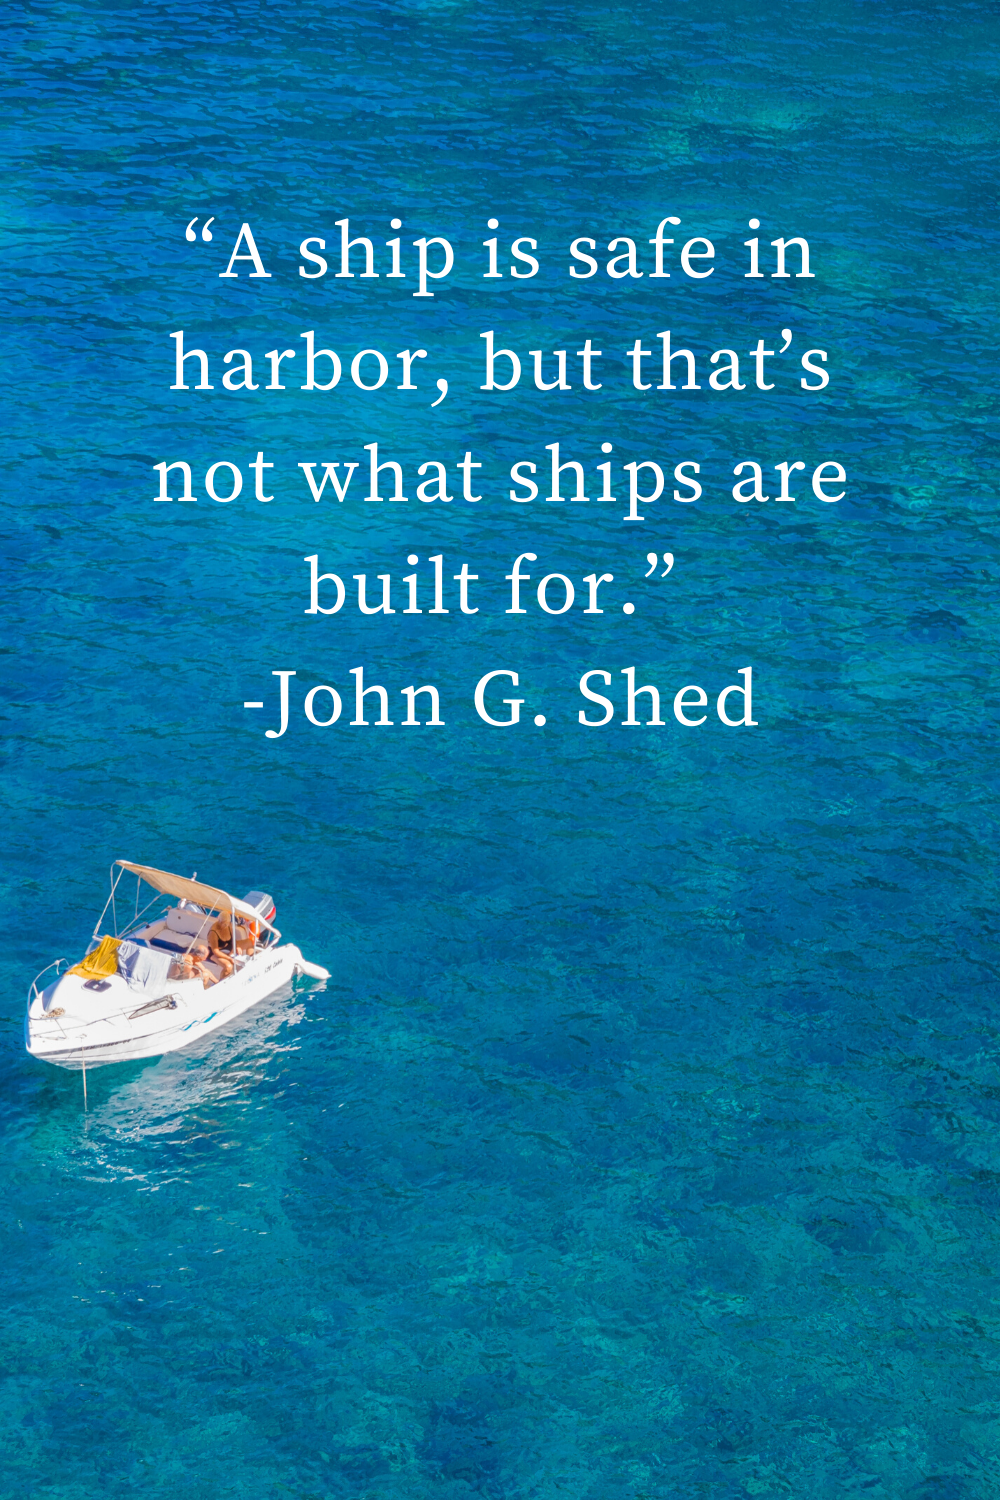 Motivational Quote - A ship is safe in harbor, but that's not what ships are built for.